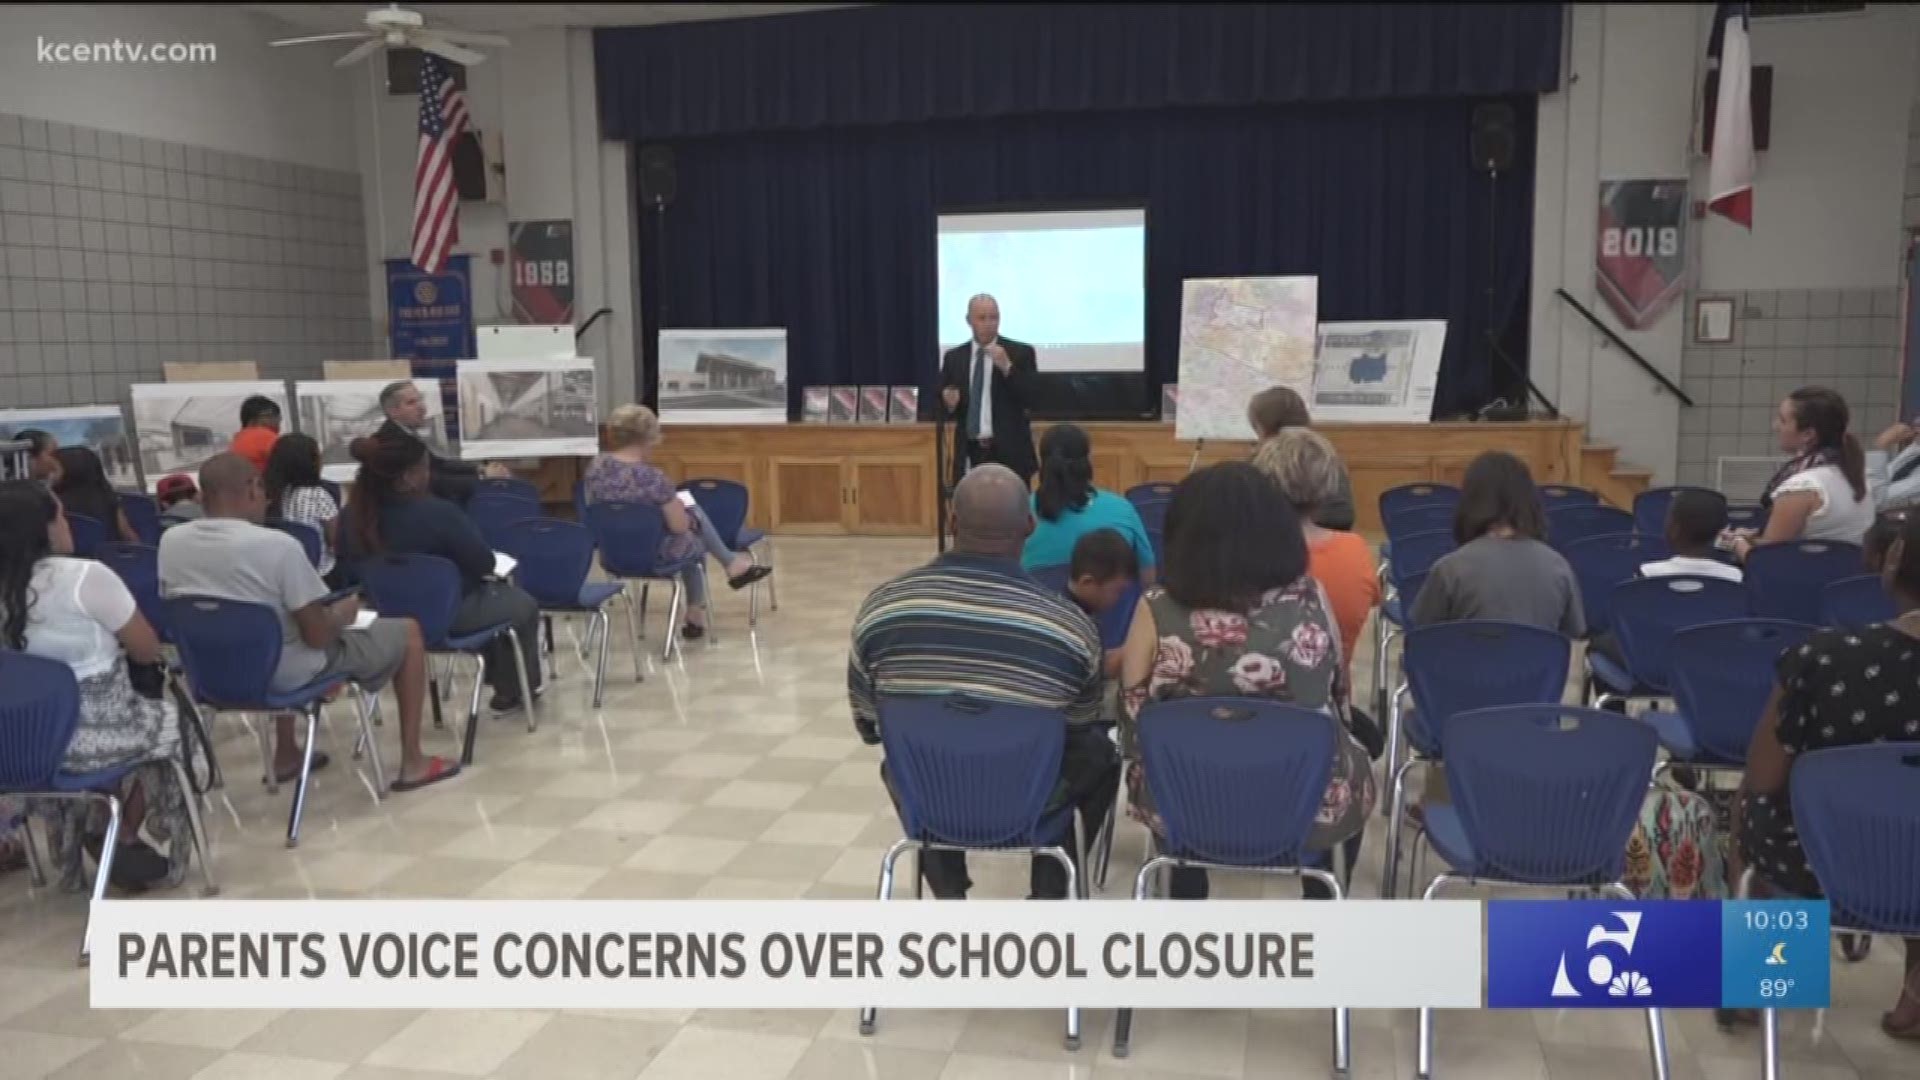 Students are being moved to other campuses as the East Ward Elementary School is scheduled to be demolished. The demolition is part of a plan to build a bigger and better school to replace the old one.